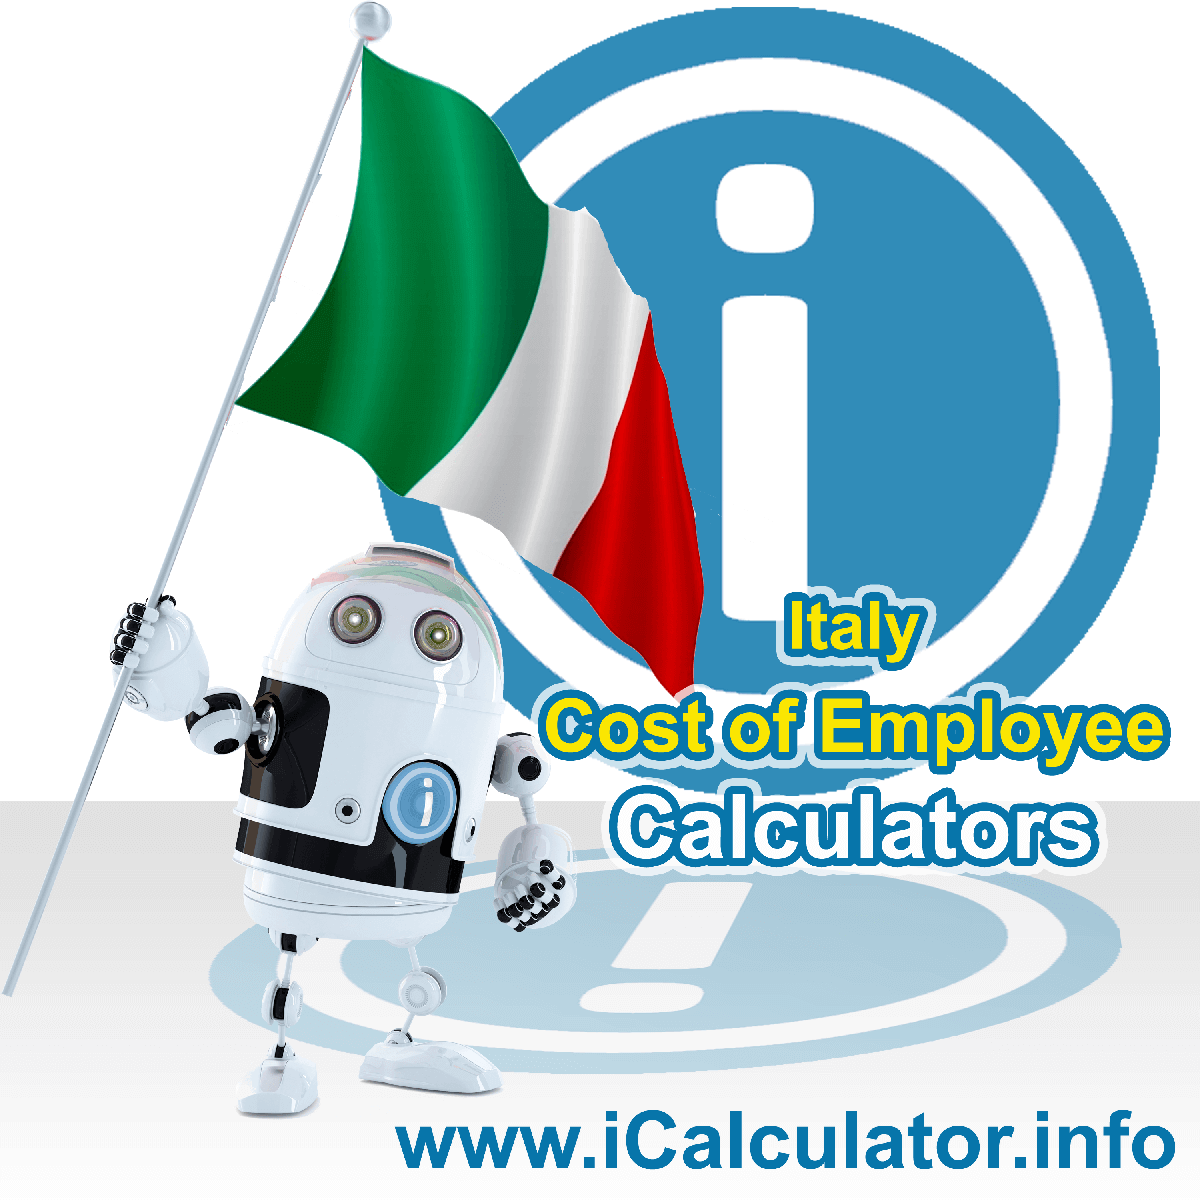 Italy Payroll Calculator. This image shows a new employer in Italy looking at payroll and human resource services in Italy as they want to hire an employee in Italy but are not sure of the employment costs. So, they make use of the Italy payroll calculator to understand their employment cost in Italy in 2023